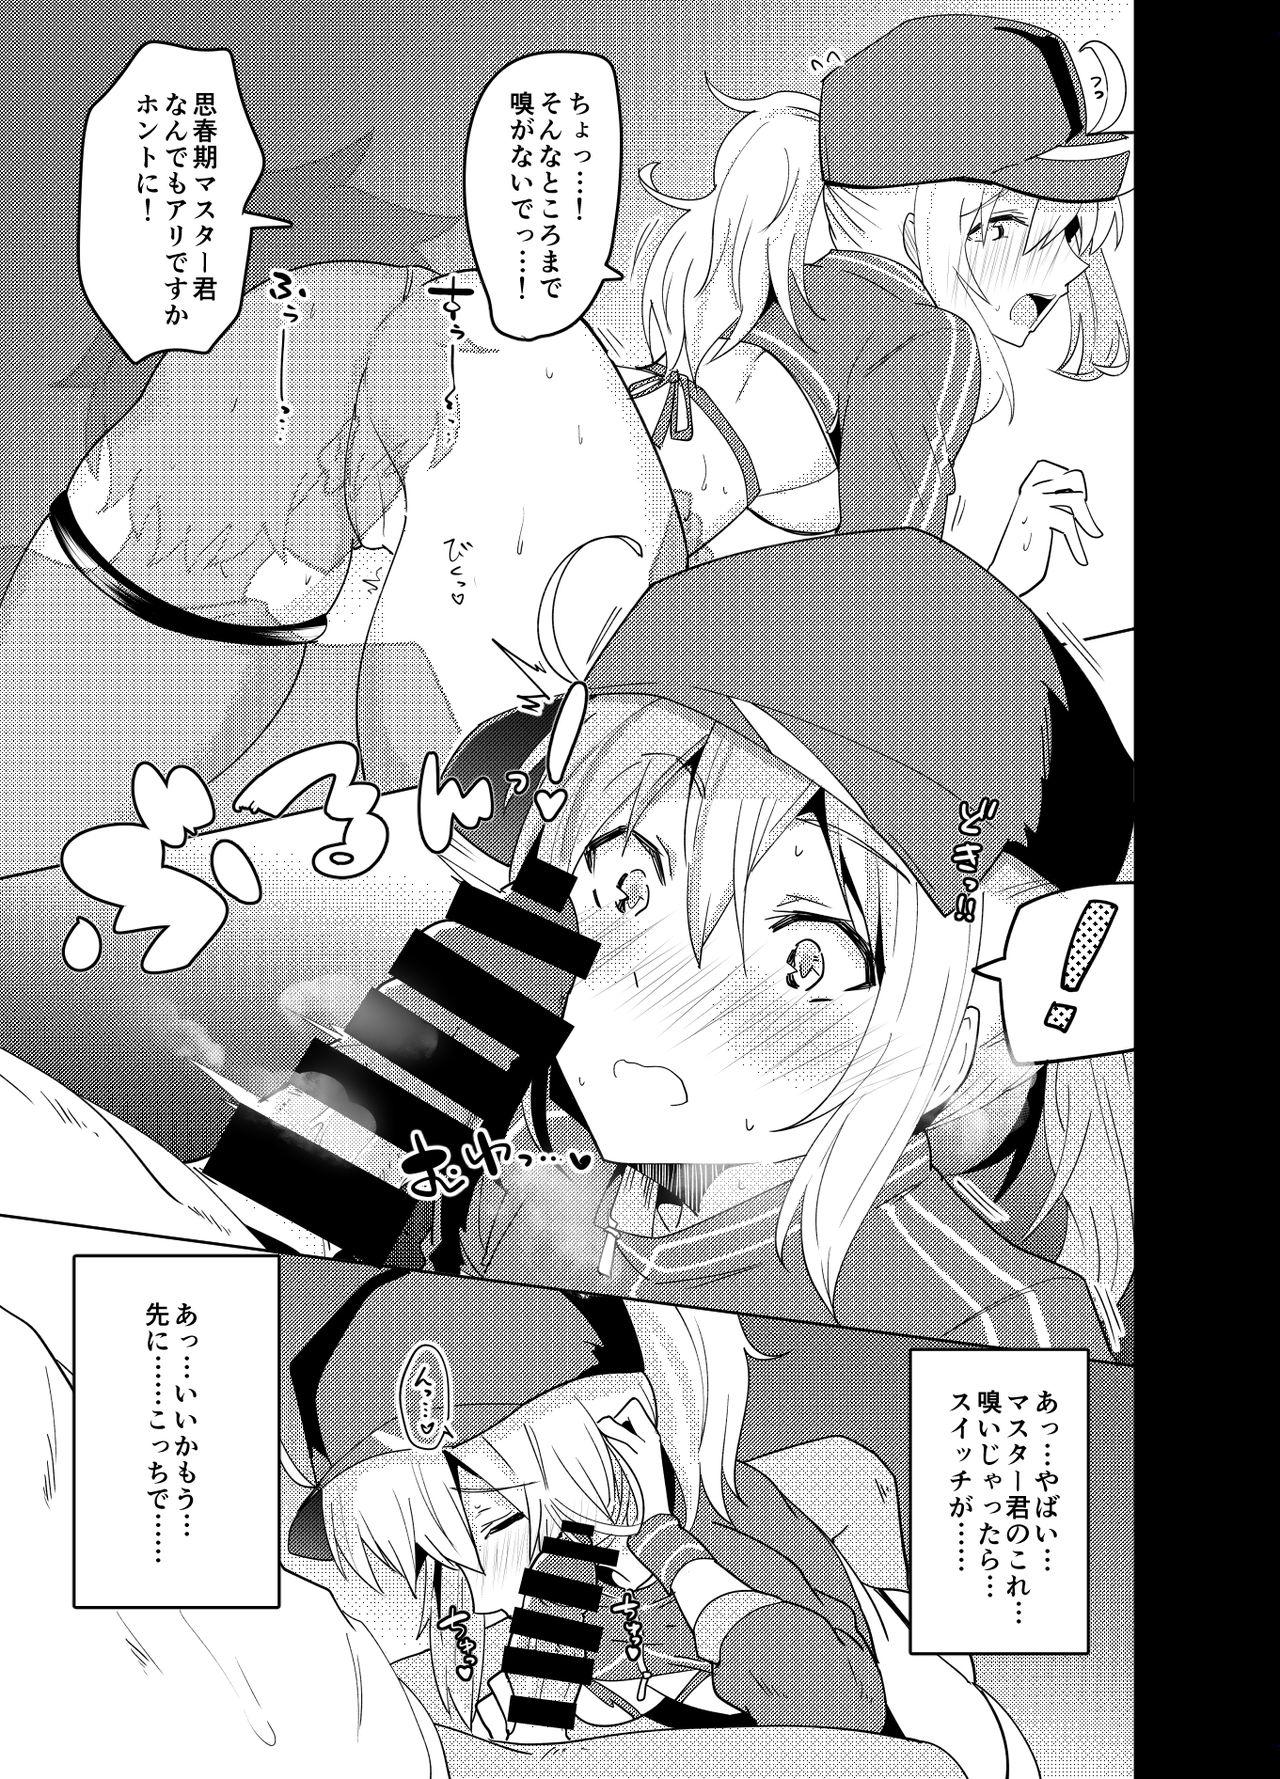 Exposed Dosukebe Saber Wars 3 - Fate grand order Amazing - Page 9